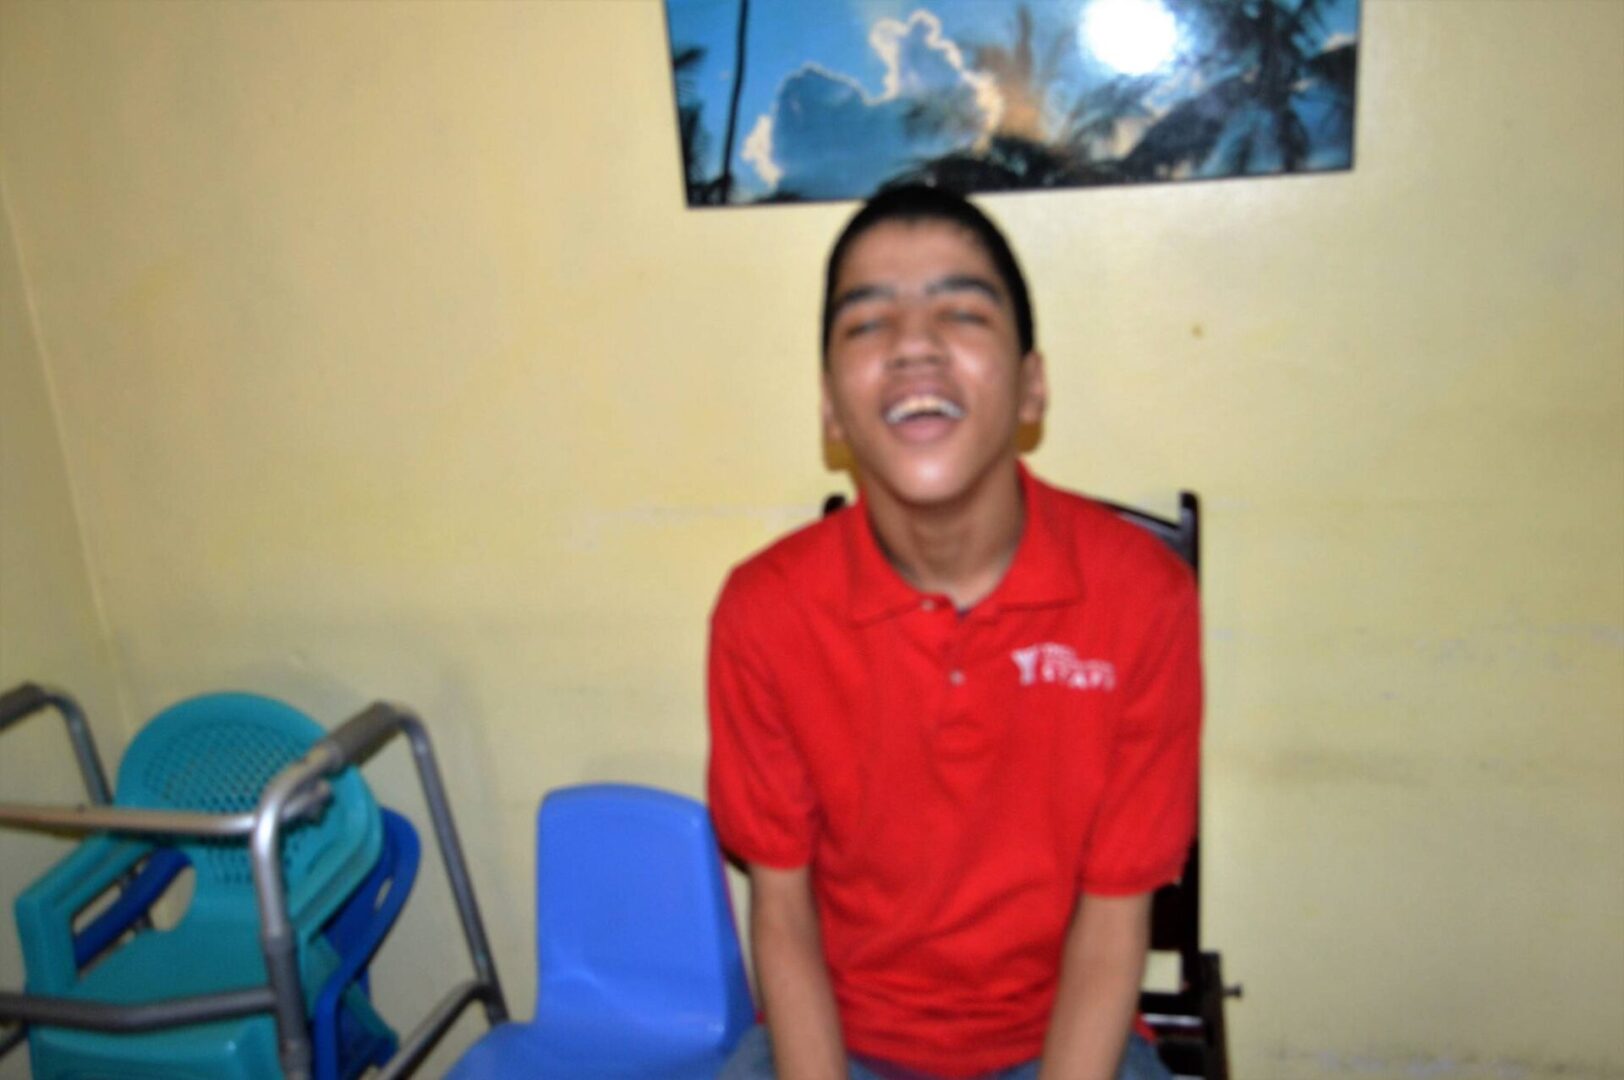 A boy in a red polo shirt sitting on a chair and smiling widely